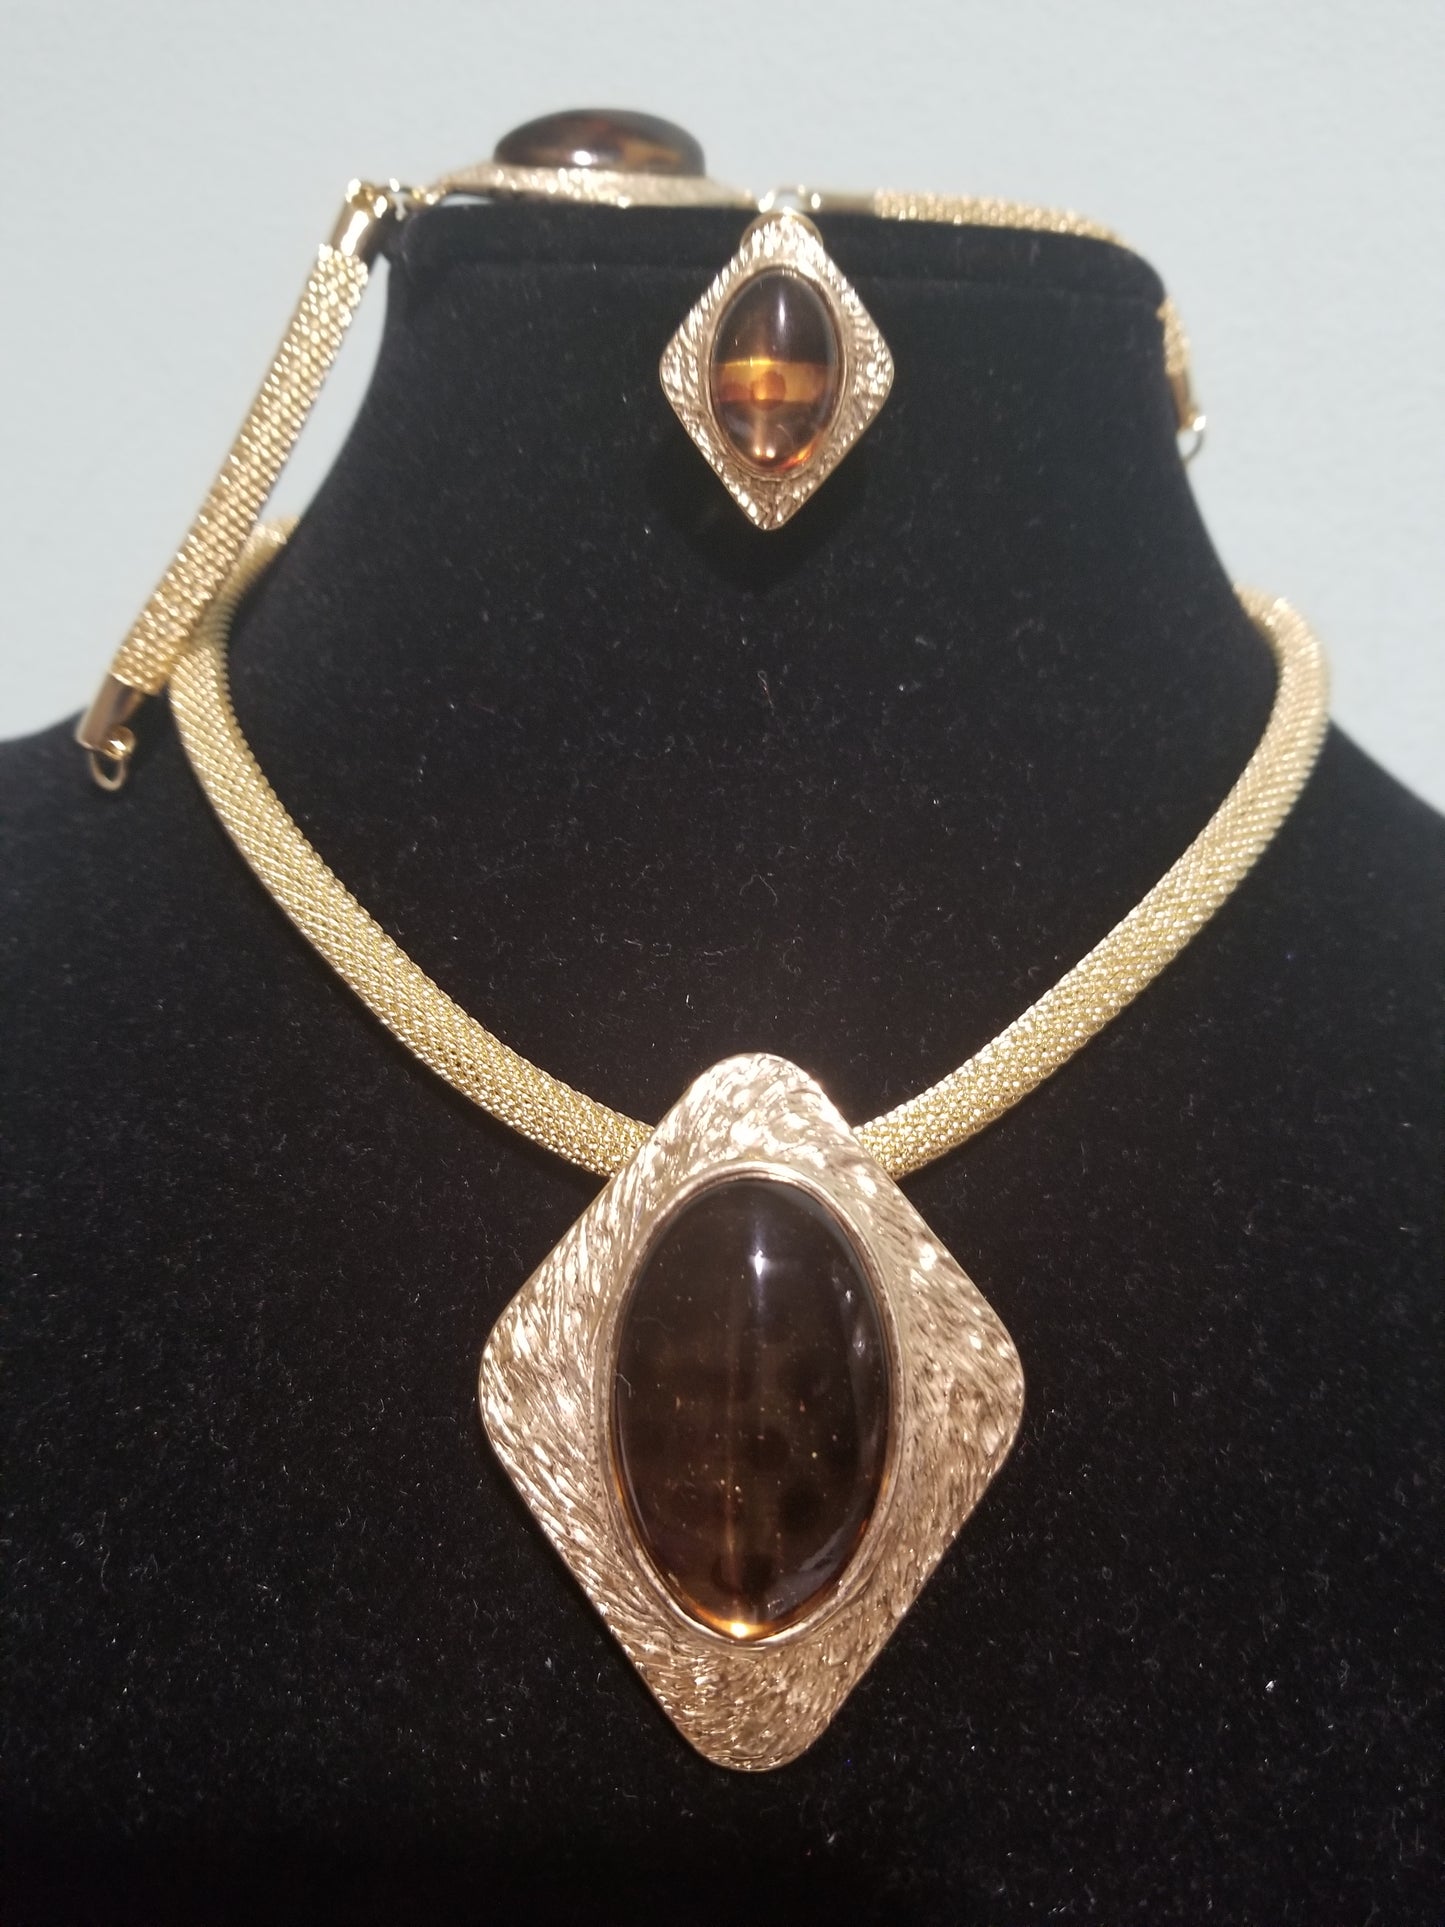 Clearance: 18k high quality Gold plating Dubai Jewelry set. Beautiful brown stone settings. 3piece necklace, earrings, bracelet matching set. African party Jewelry set. Quality, hypoallergenic plating